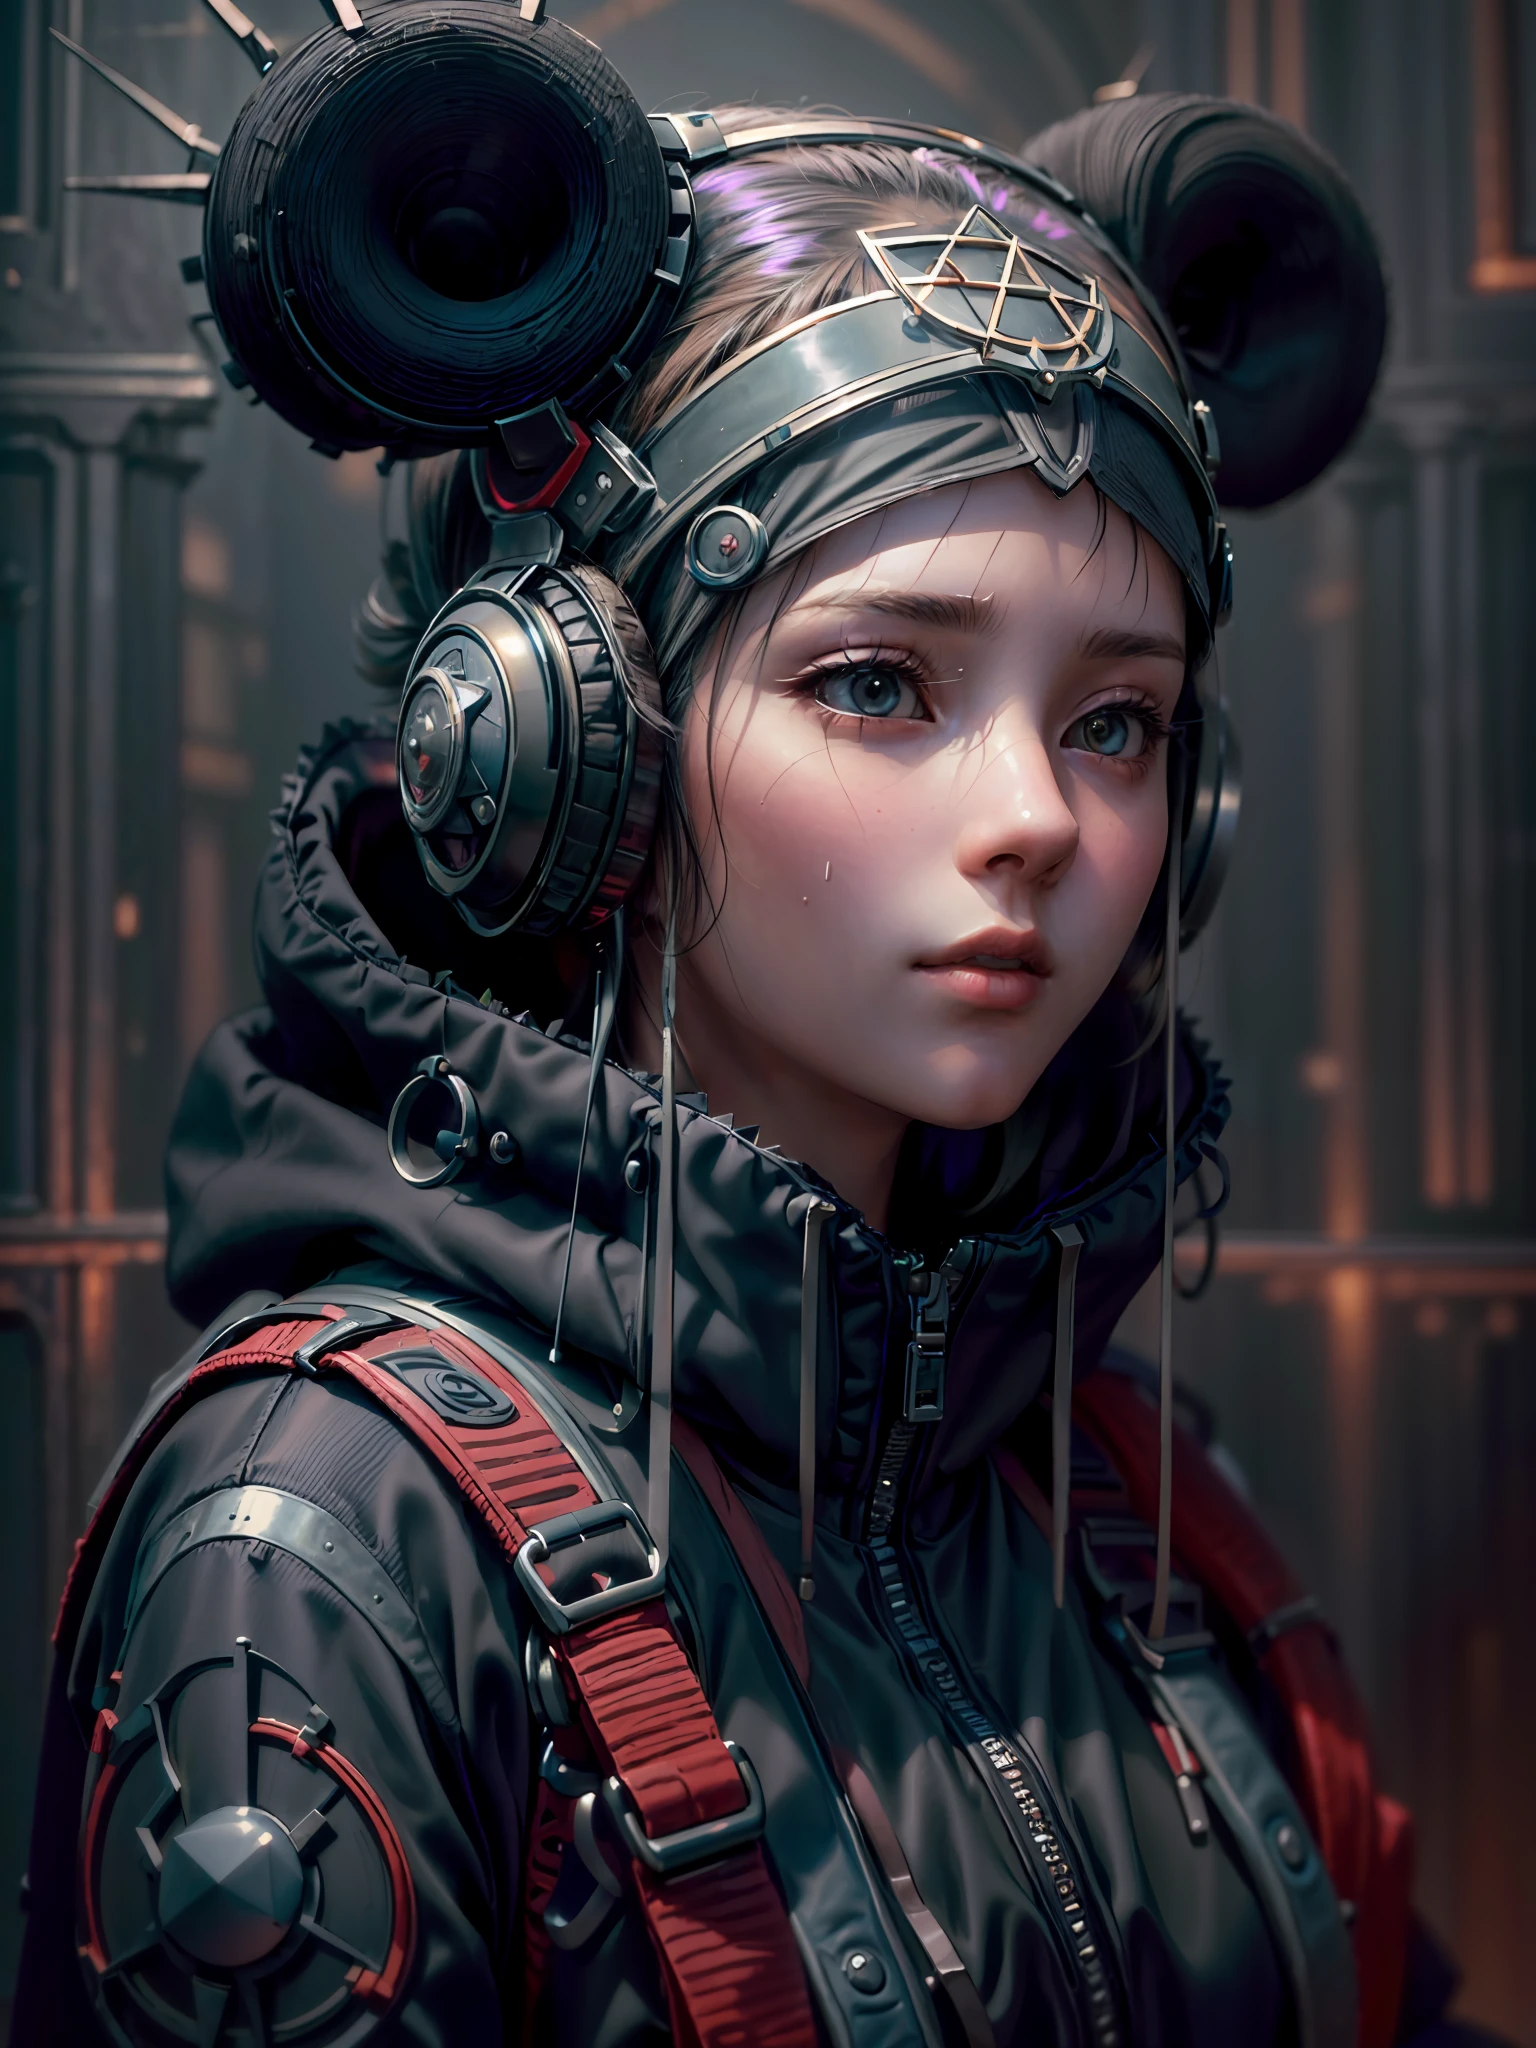 ((((adorable,captivating,enchanting,female)))),(top buns),((wearing hood,wearing leggings,wearing miniskirt,wearing backpack)),((wearing boots,wearing gloves,wearing blades)), (((fuzzy-logic, psychenautics, mysticism, urban-gothic, psychonaut, sci-fi, hi-fi, abstracted, quasi-organic, sacred geometrics, biomechanics, alchemical, isometrics))), (((most beautiful images in existence))), (masterpiece), (masterwork), ((top quality)), ((best quality)), ((highest quality)), ((high fidelity)), ((highest resolution)), ((highres)), ((hyper-detailed)), (((detail enhancement))), ((deeply detailed)), unity 8k, unreal 8k, octane render, awe inspiring, breathtaking, hdr, uhd, hdr, fhd, meticulous, intricate, intimate, nuanced, award winning, (((most beautiful artwork))), photon mapping, ray tracing, film grain, depth of field